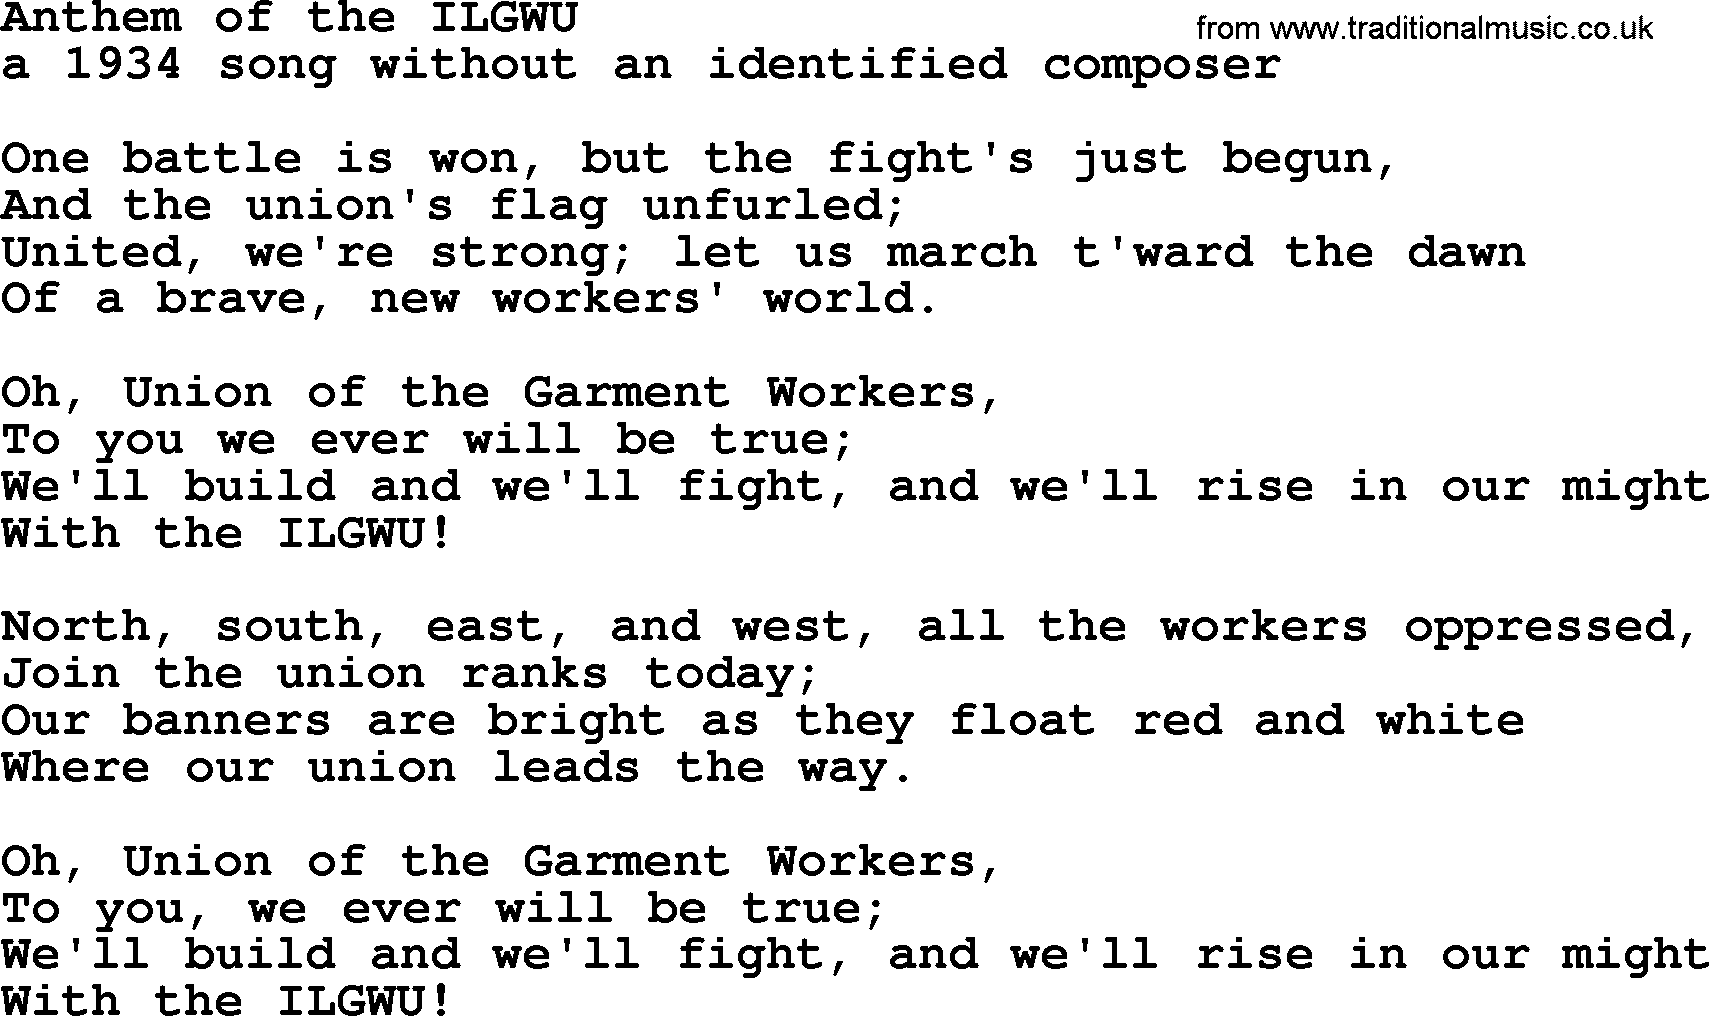 Political, Solidarity, Workers or Union song: Anthem Of The Ilgwu, lyrics